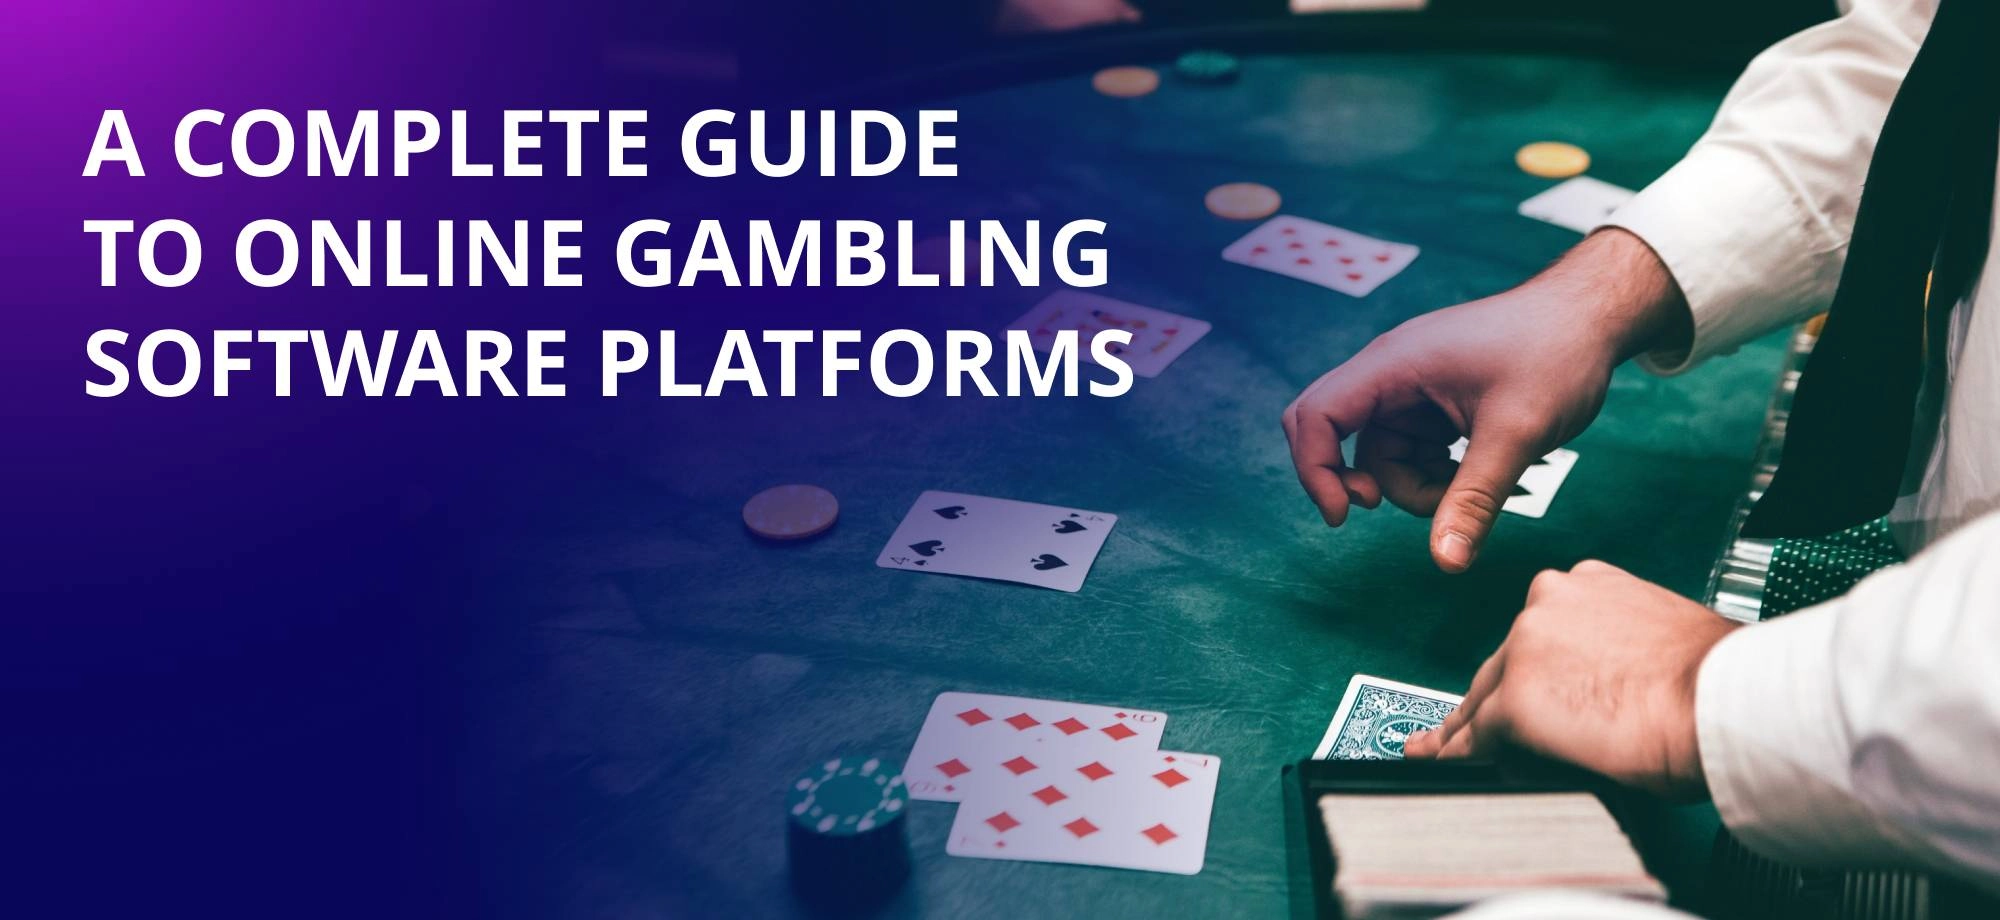 A Complete Guide to Online Gambling Software Platforms